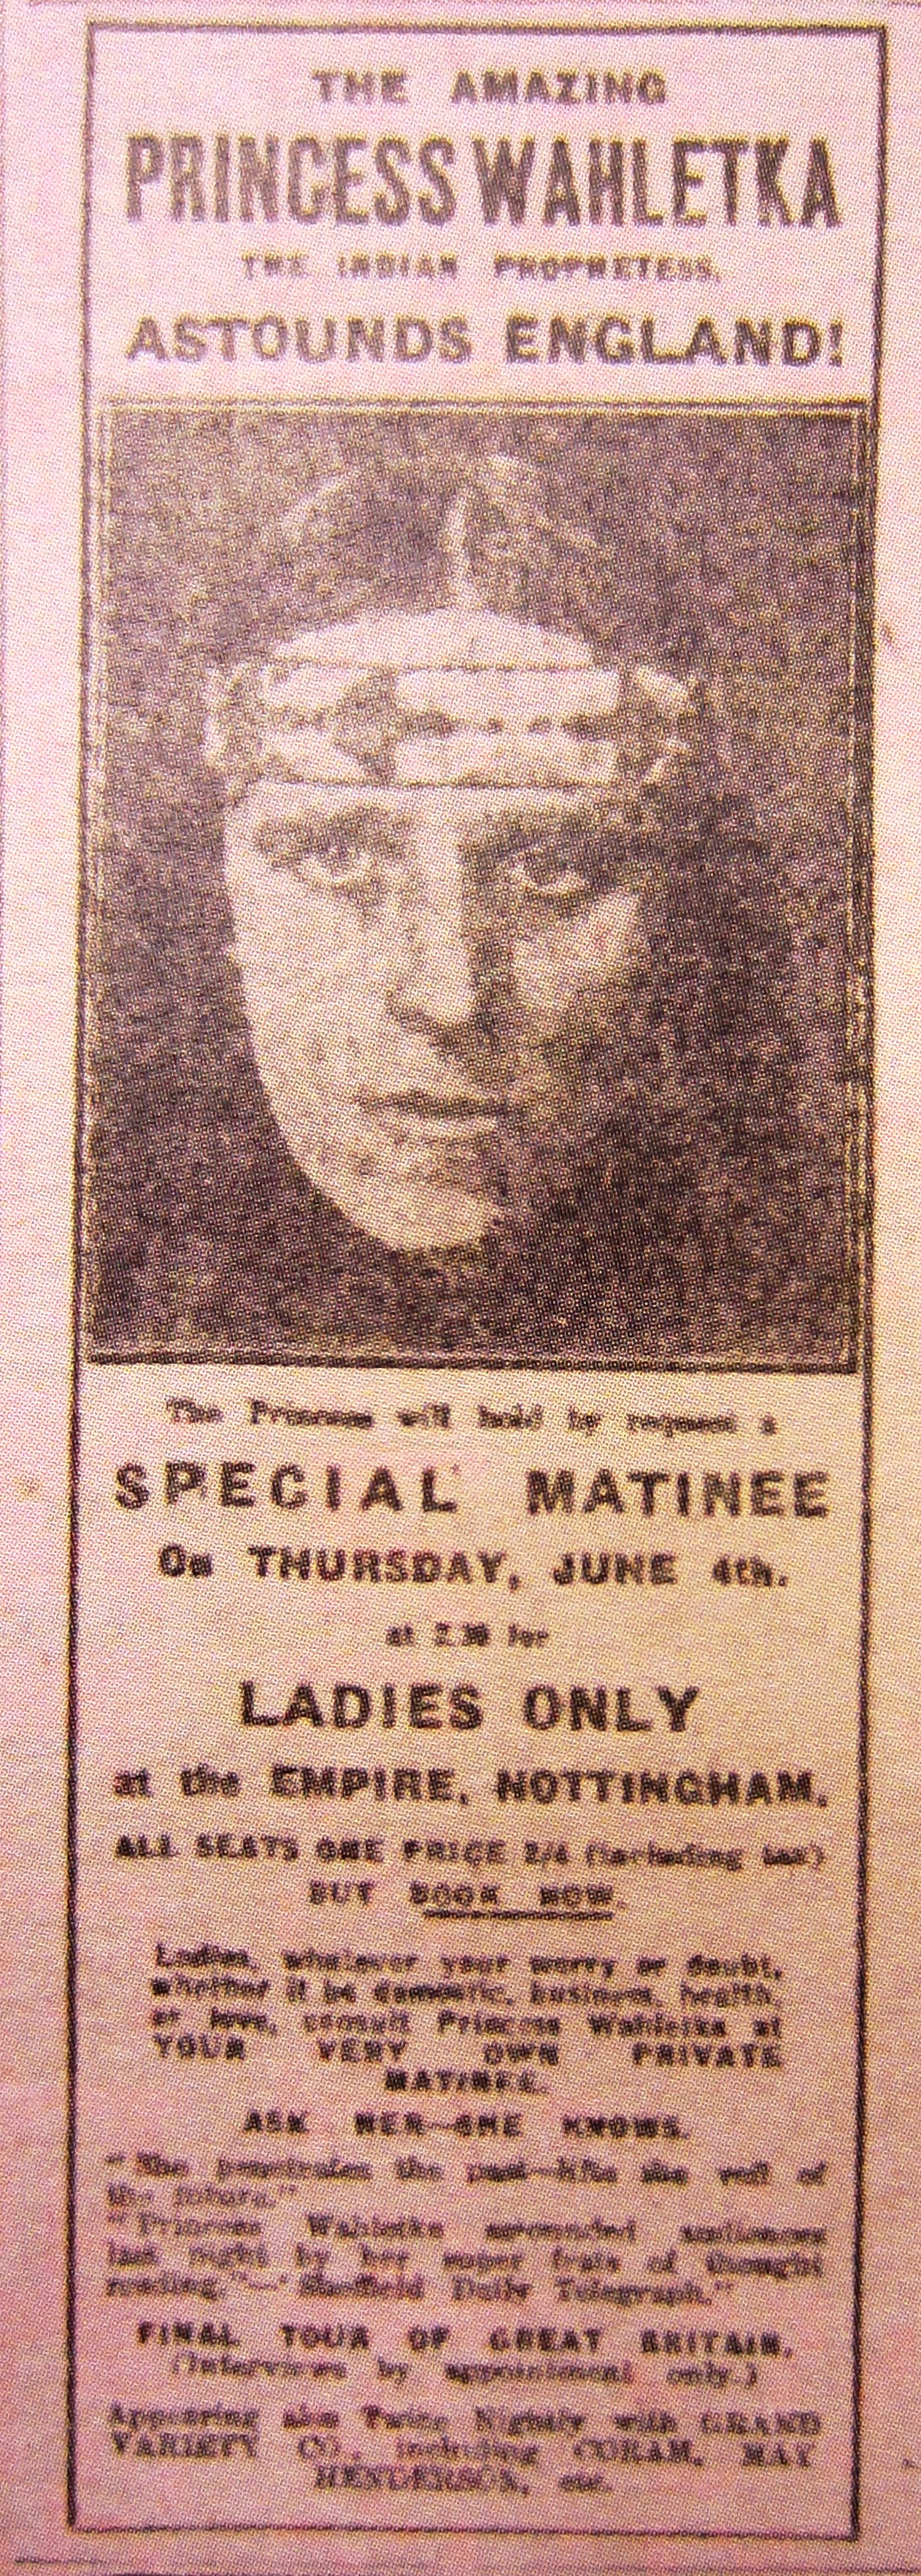 Princess Wahletka in the Nottingham Evening Post, 2 June 1925. Courtesy of British Library.